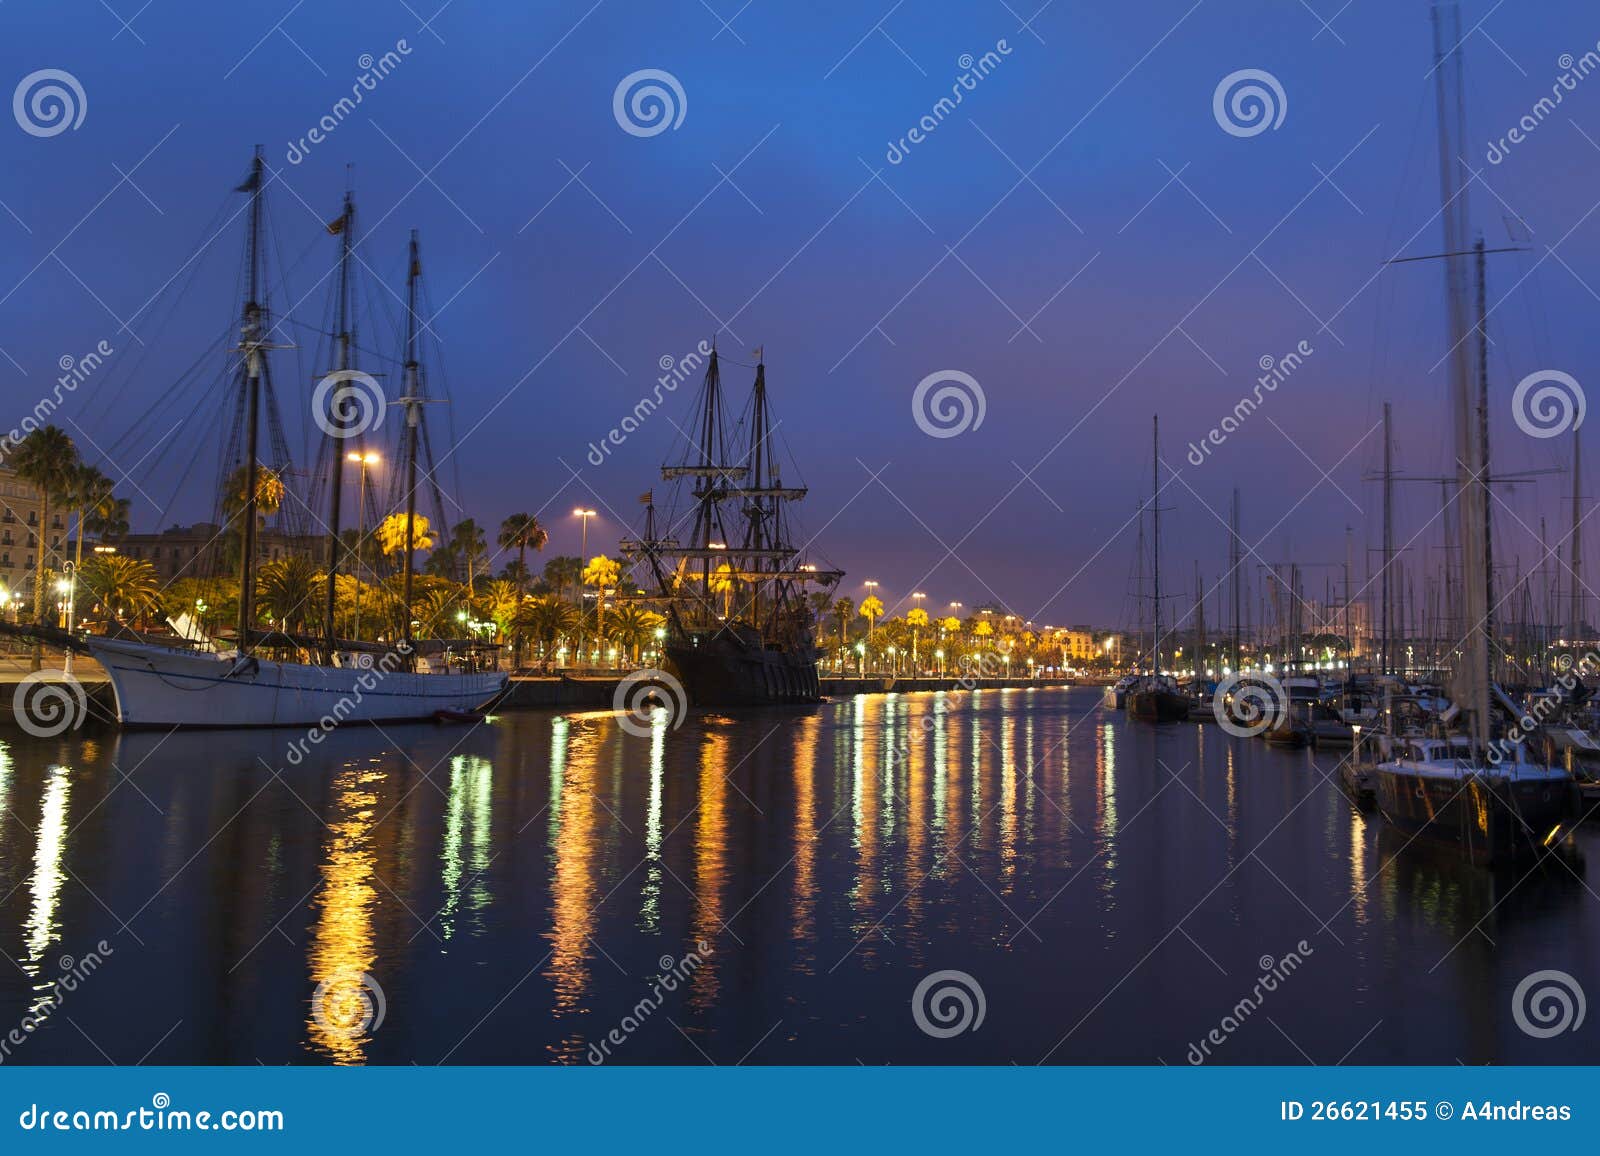 nightscene with tall ships in harbour